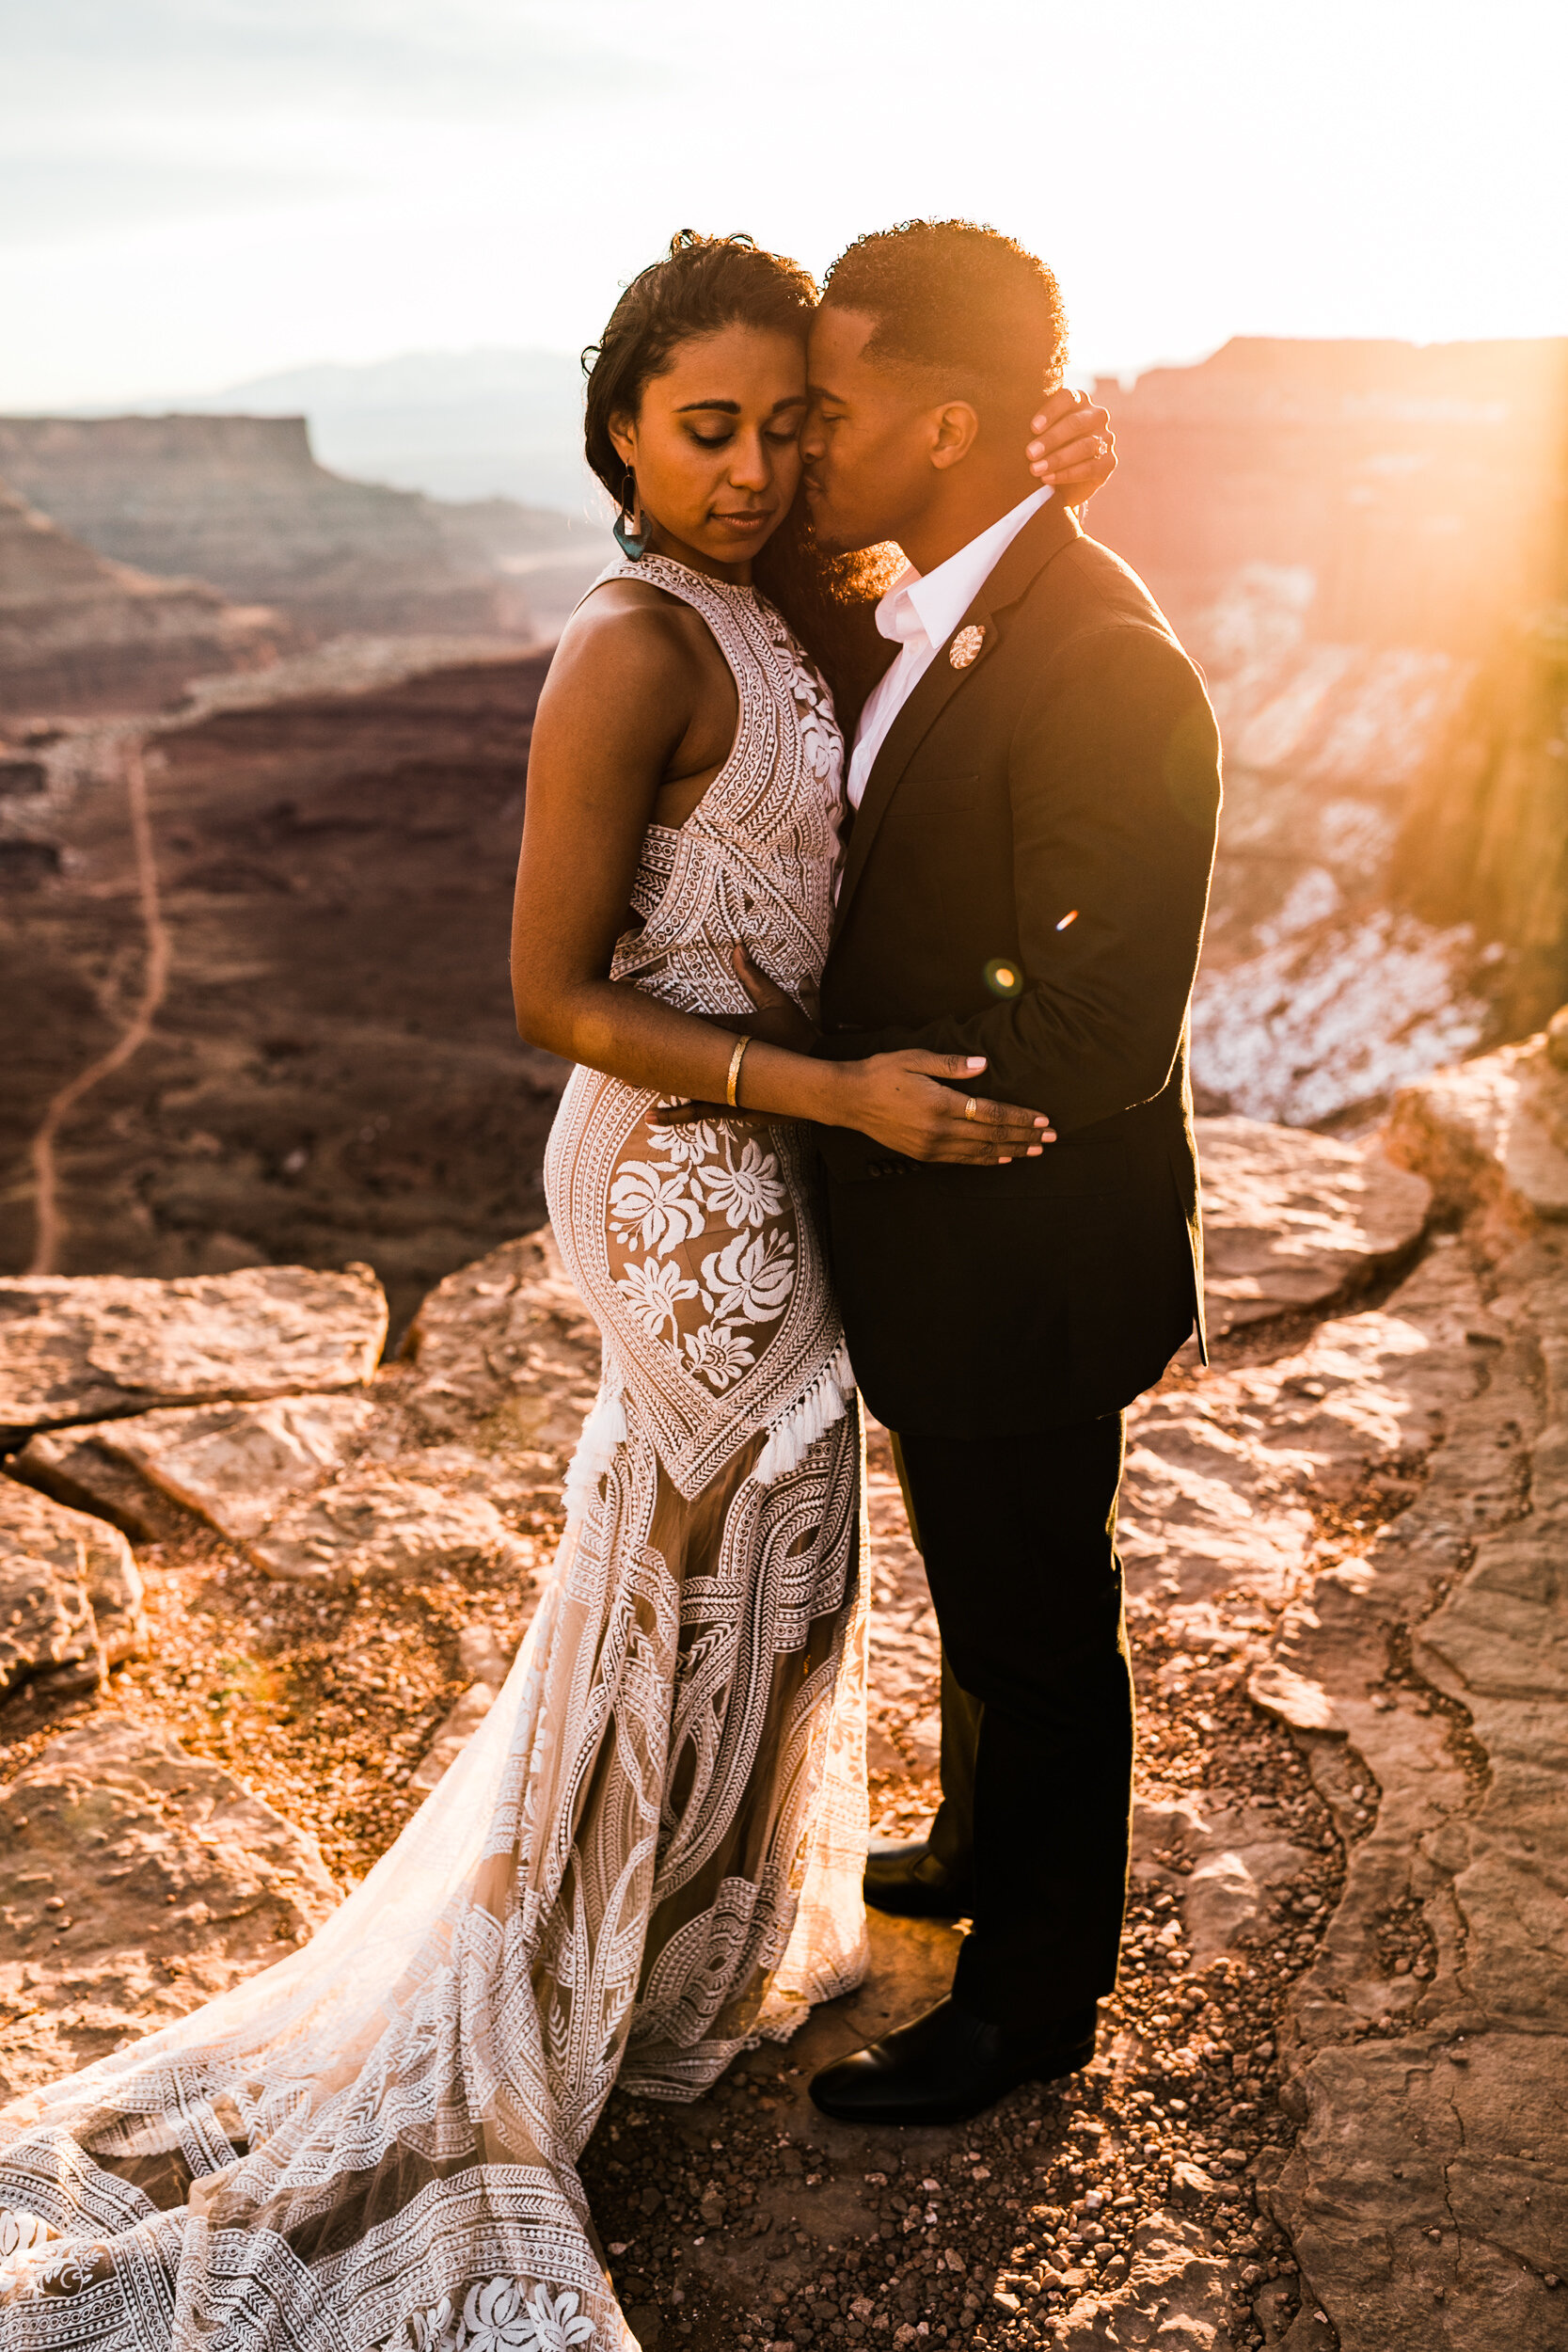 This Moab Elopement in Canyonlands National Park is major desert wedding inspiration! A surprise proposal at sunrise and Rue De Seine East Gown by The Hearnes Adventure Photography